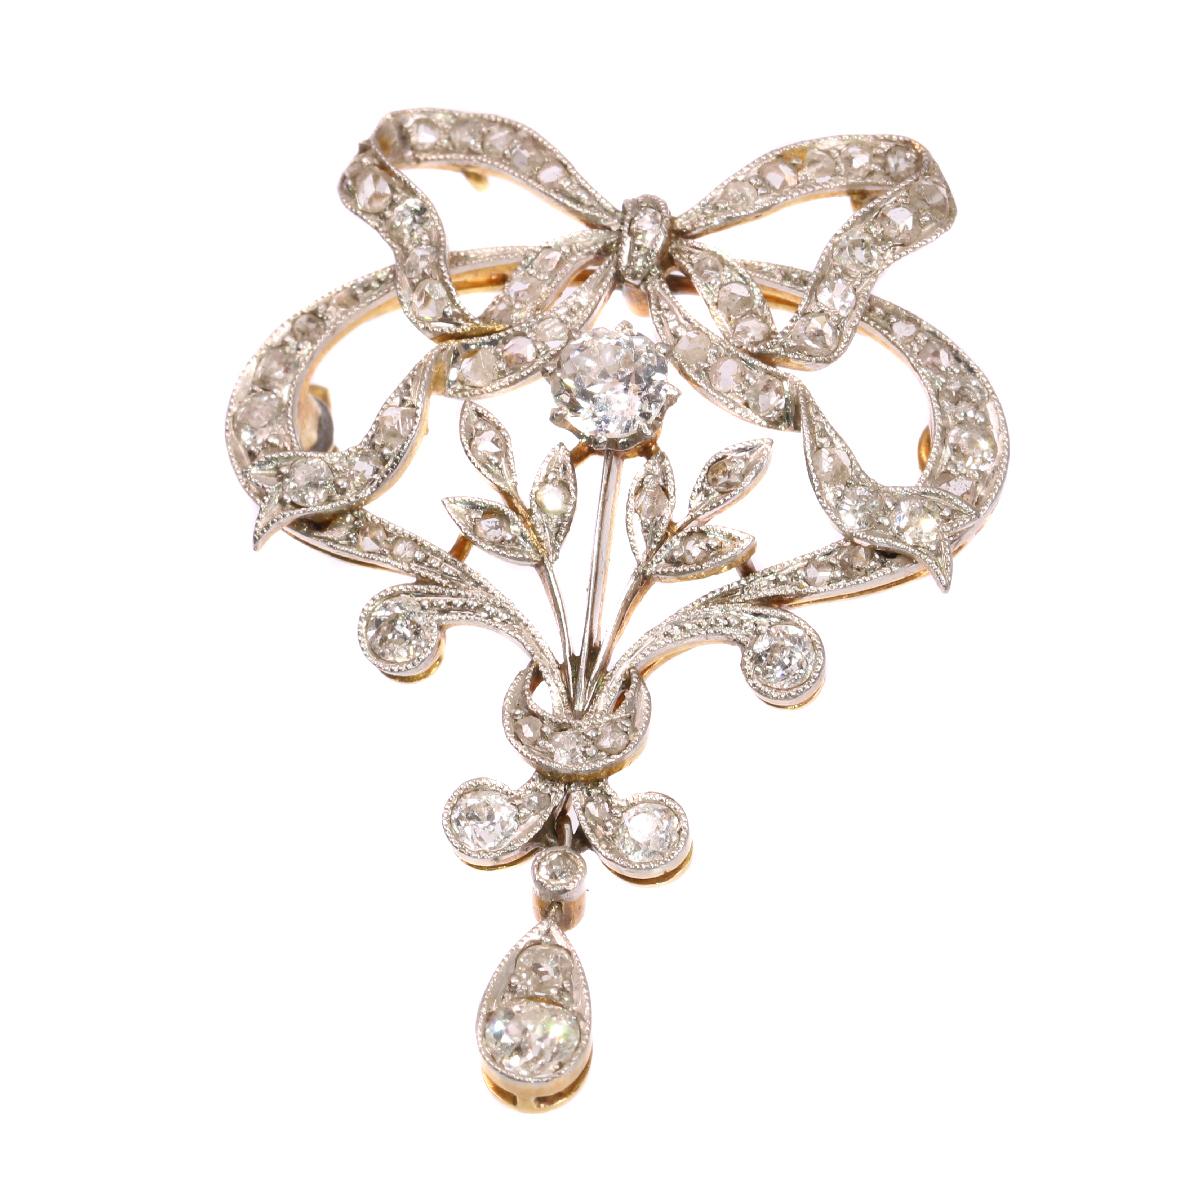 Belle Époque Belle Epoque Brooch and Pendant in Guirland Style with 72 Diamonds For Sale